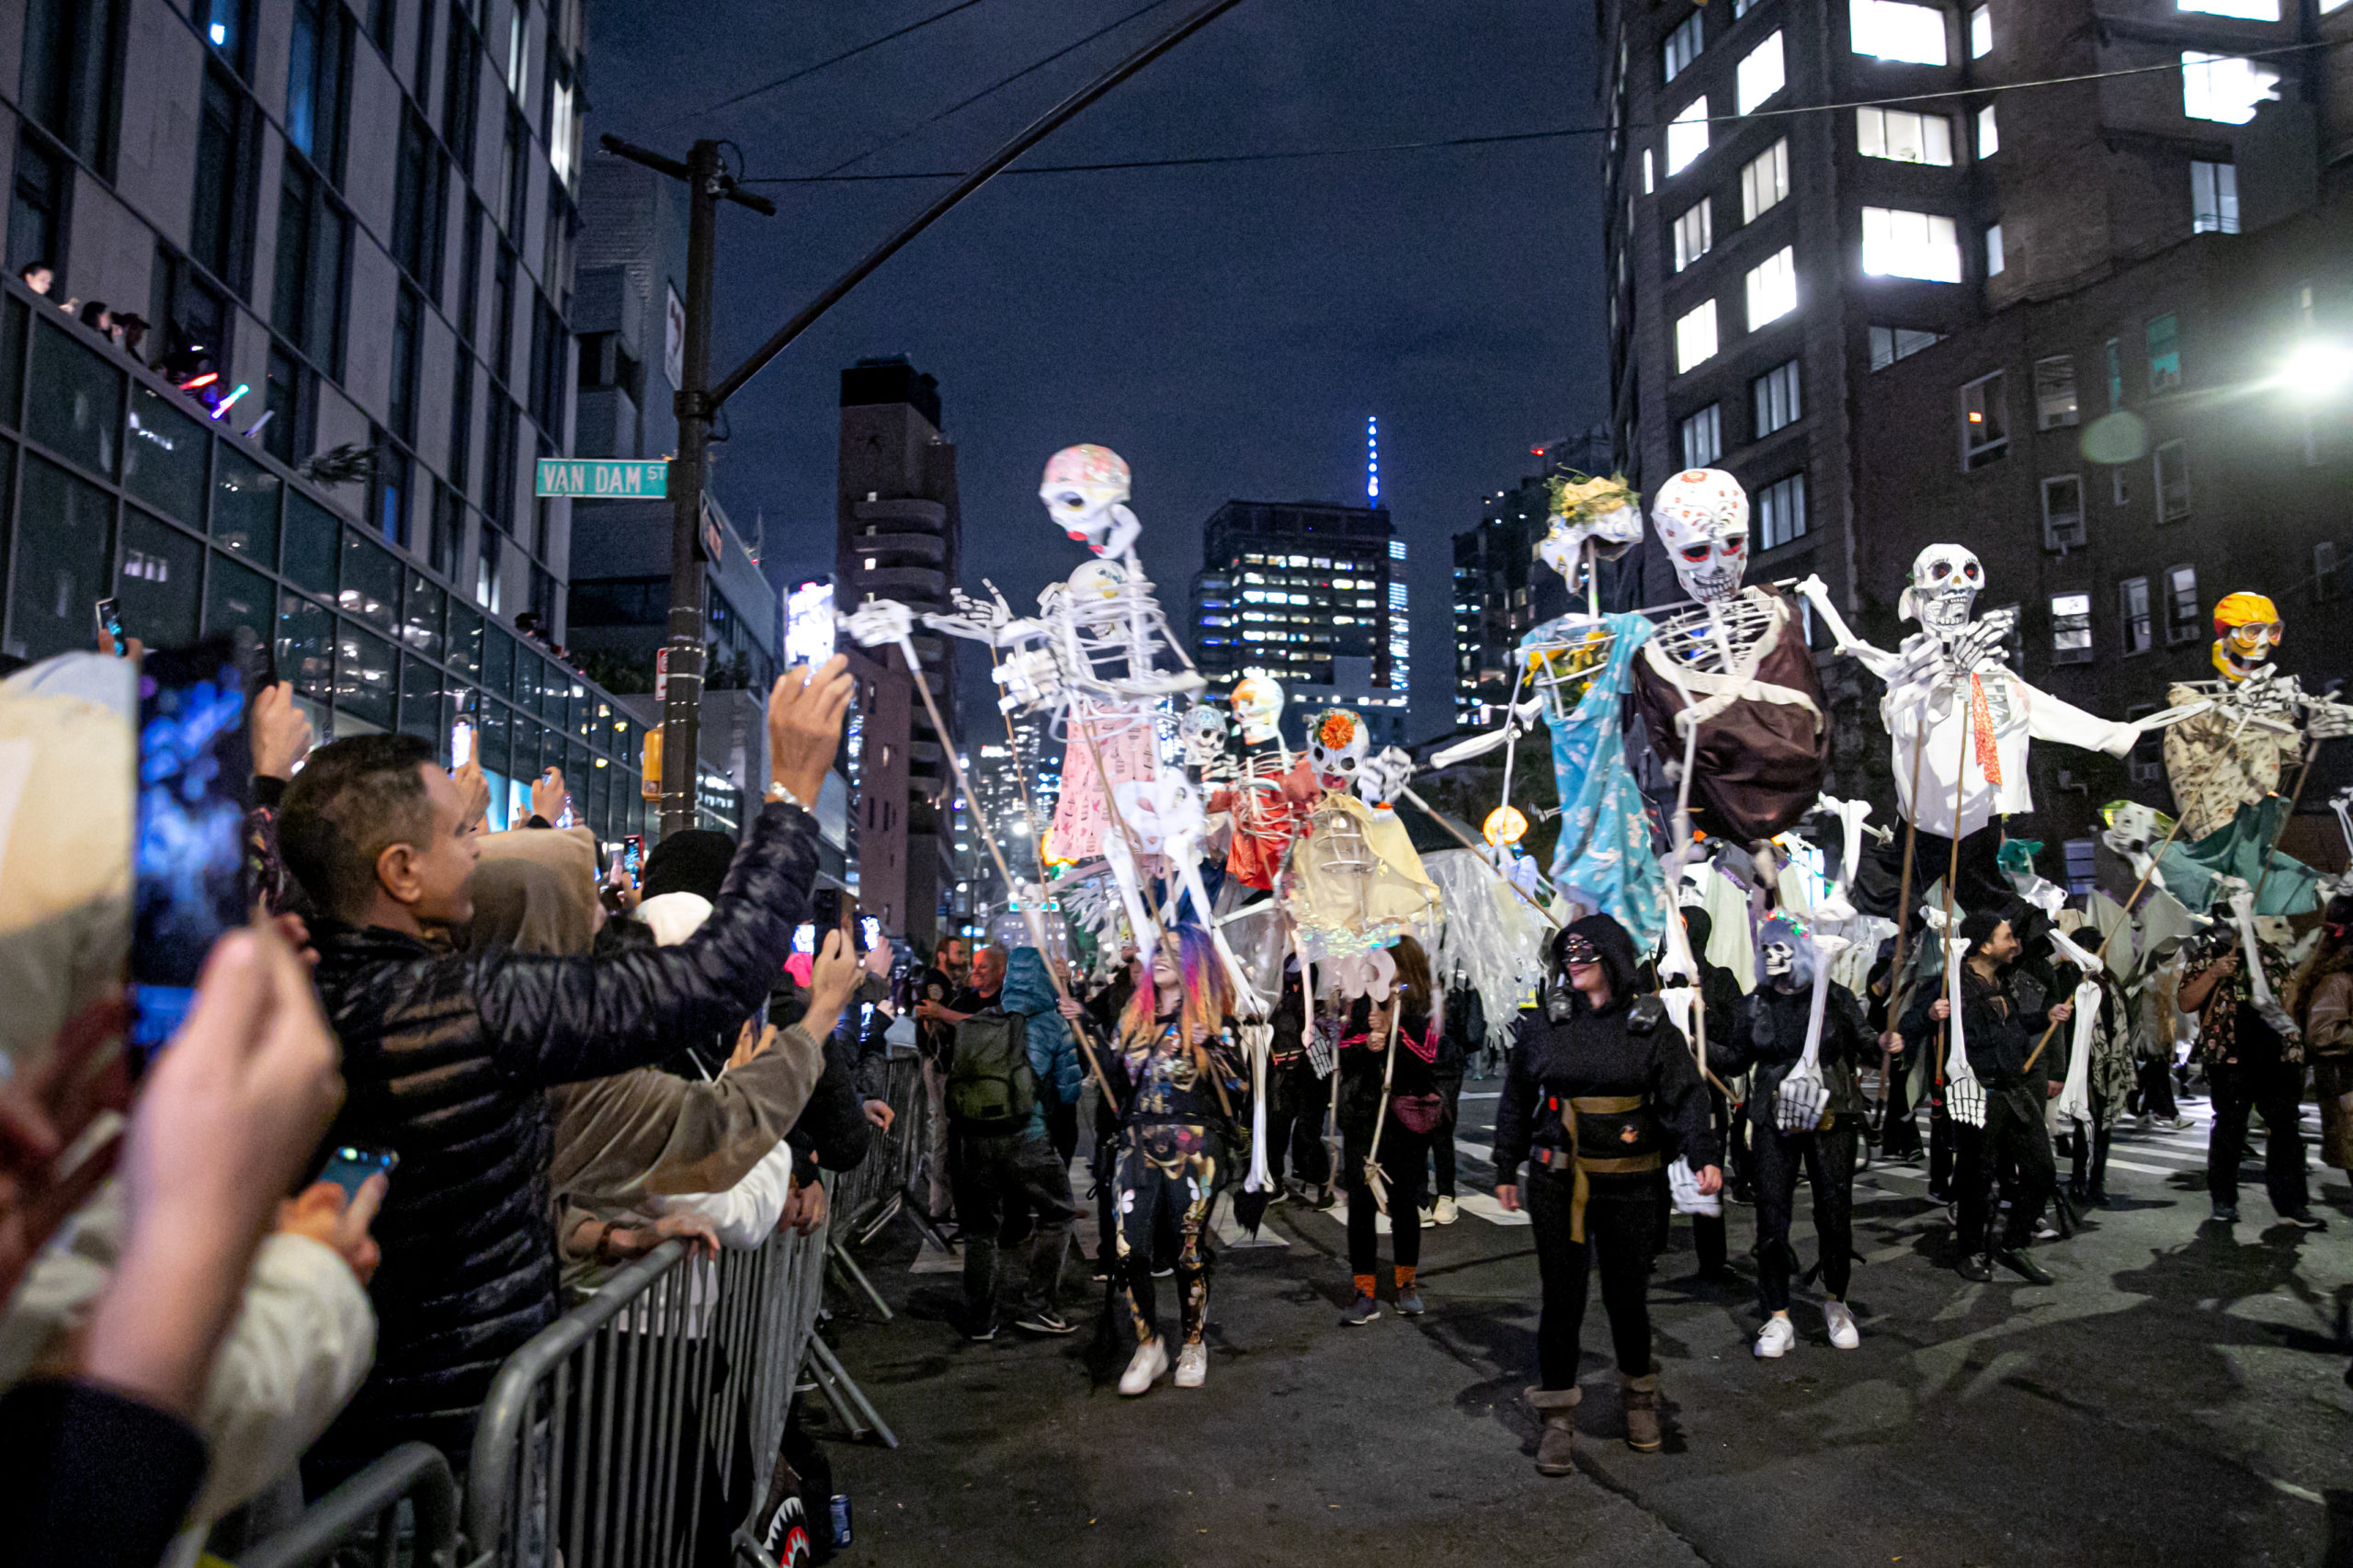 A crowd watches skeleton puppets go by in a Halloween parade.